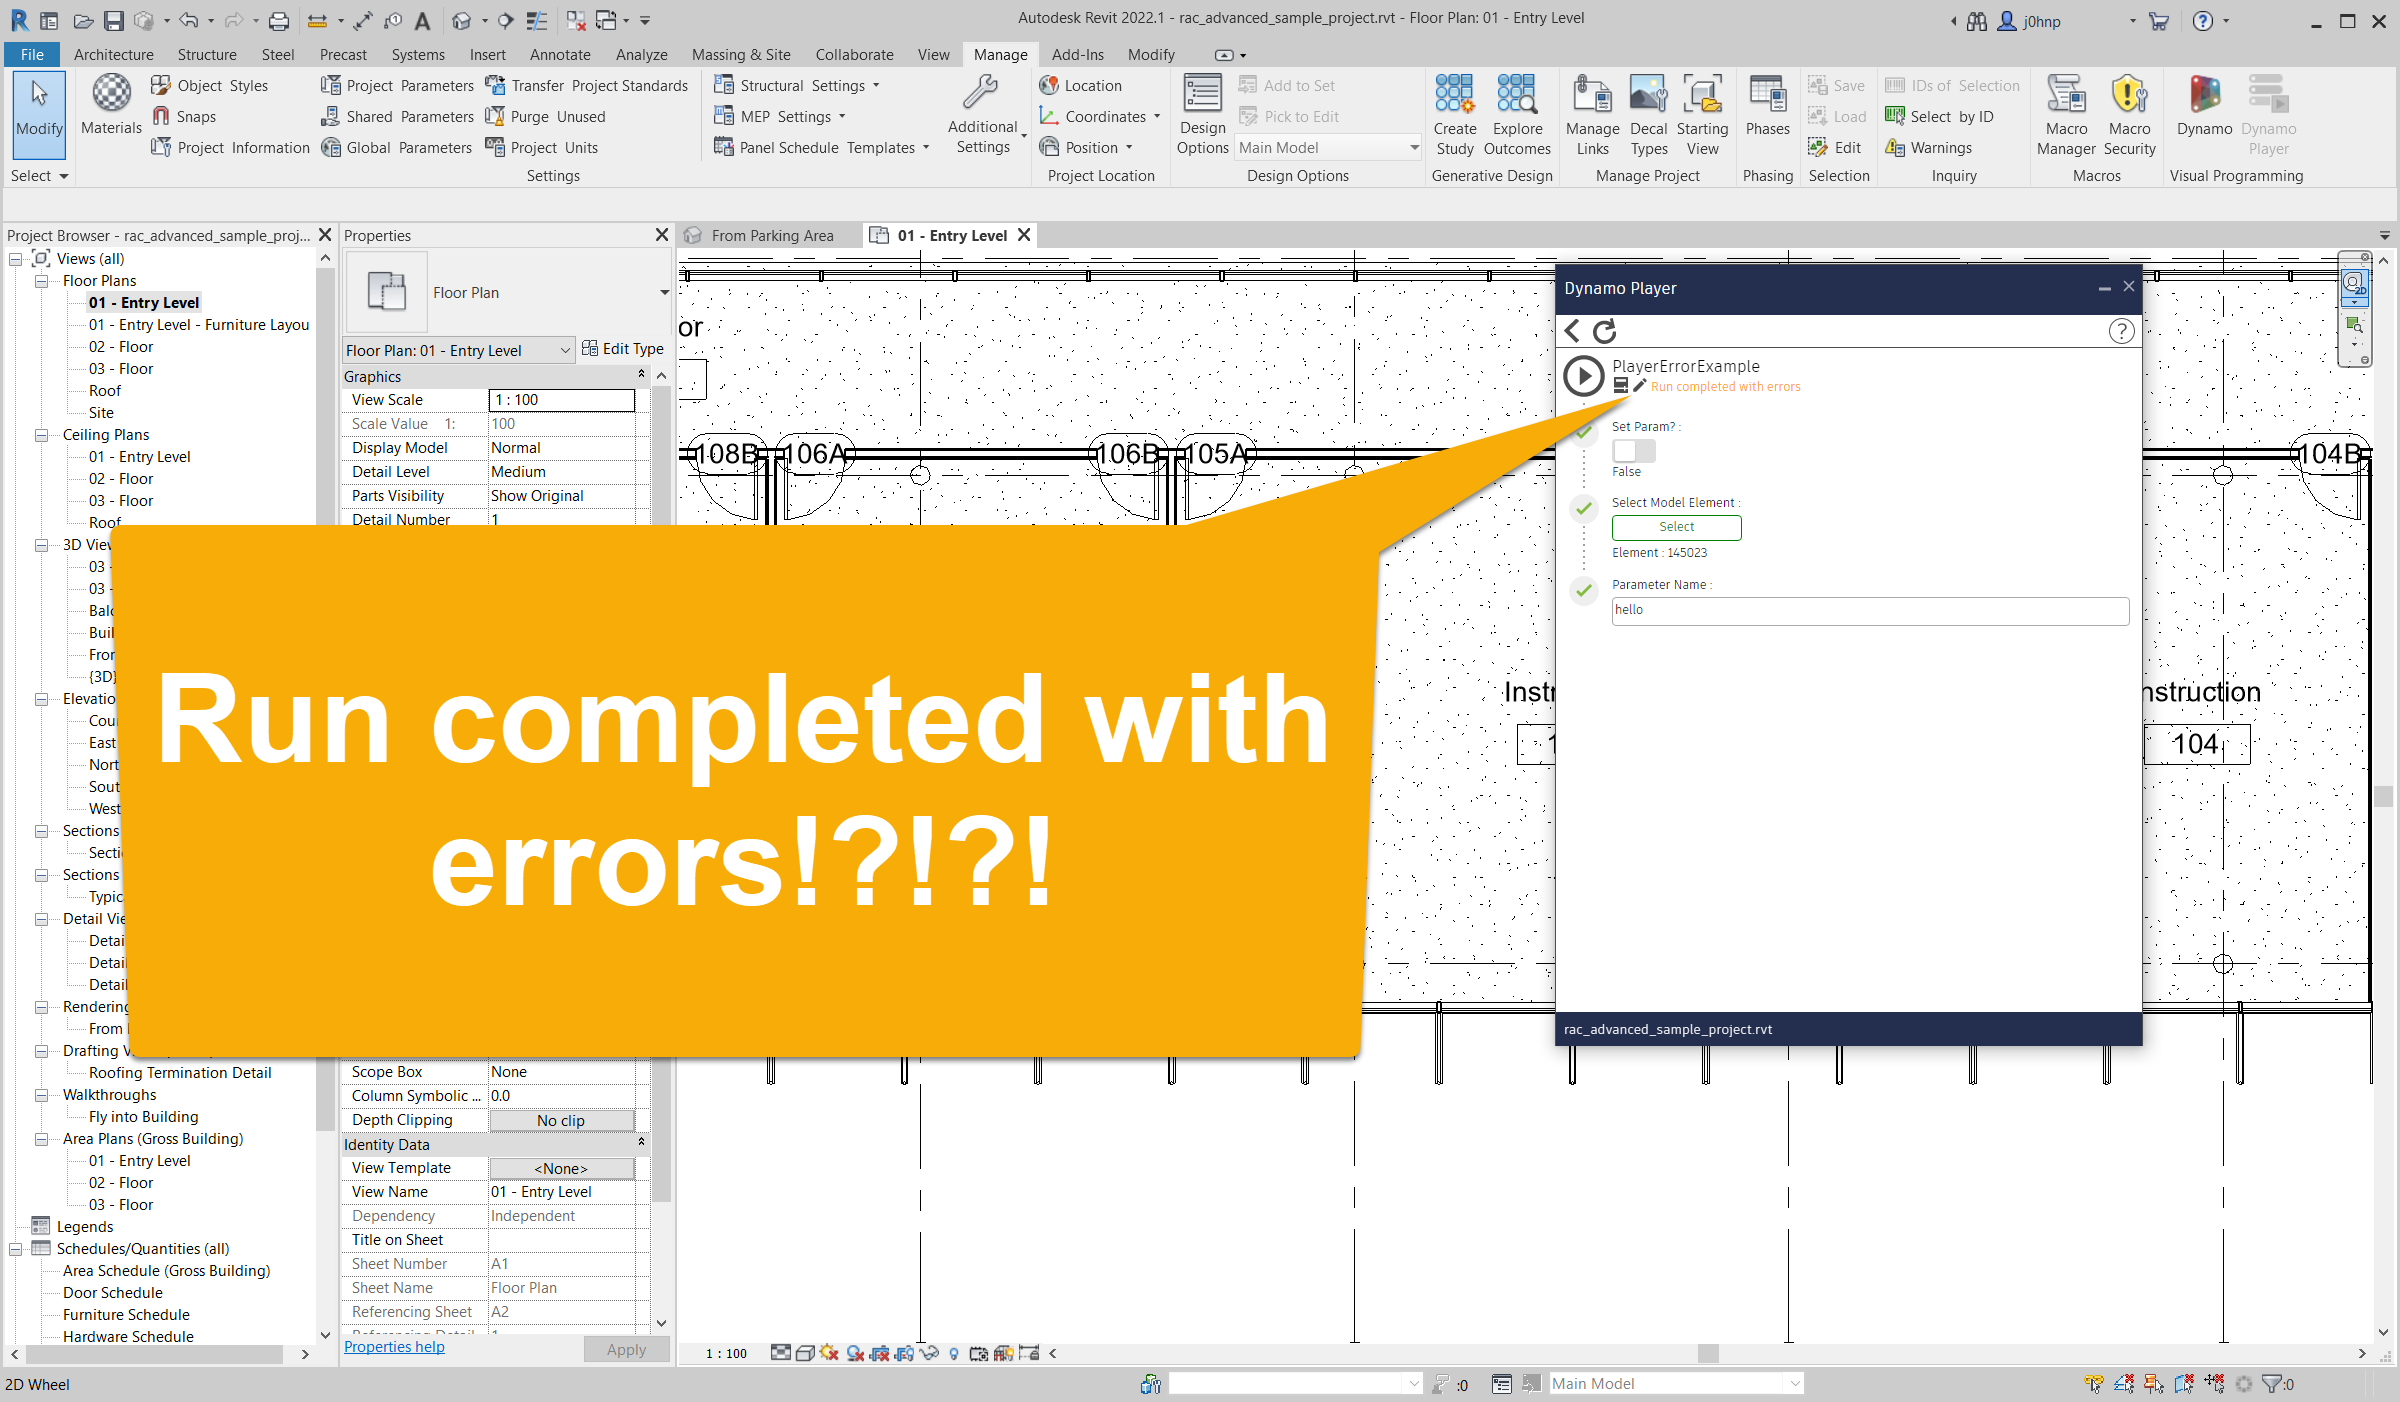 How to Suppress Run Completed with Errors in Dynamo Player